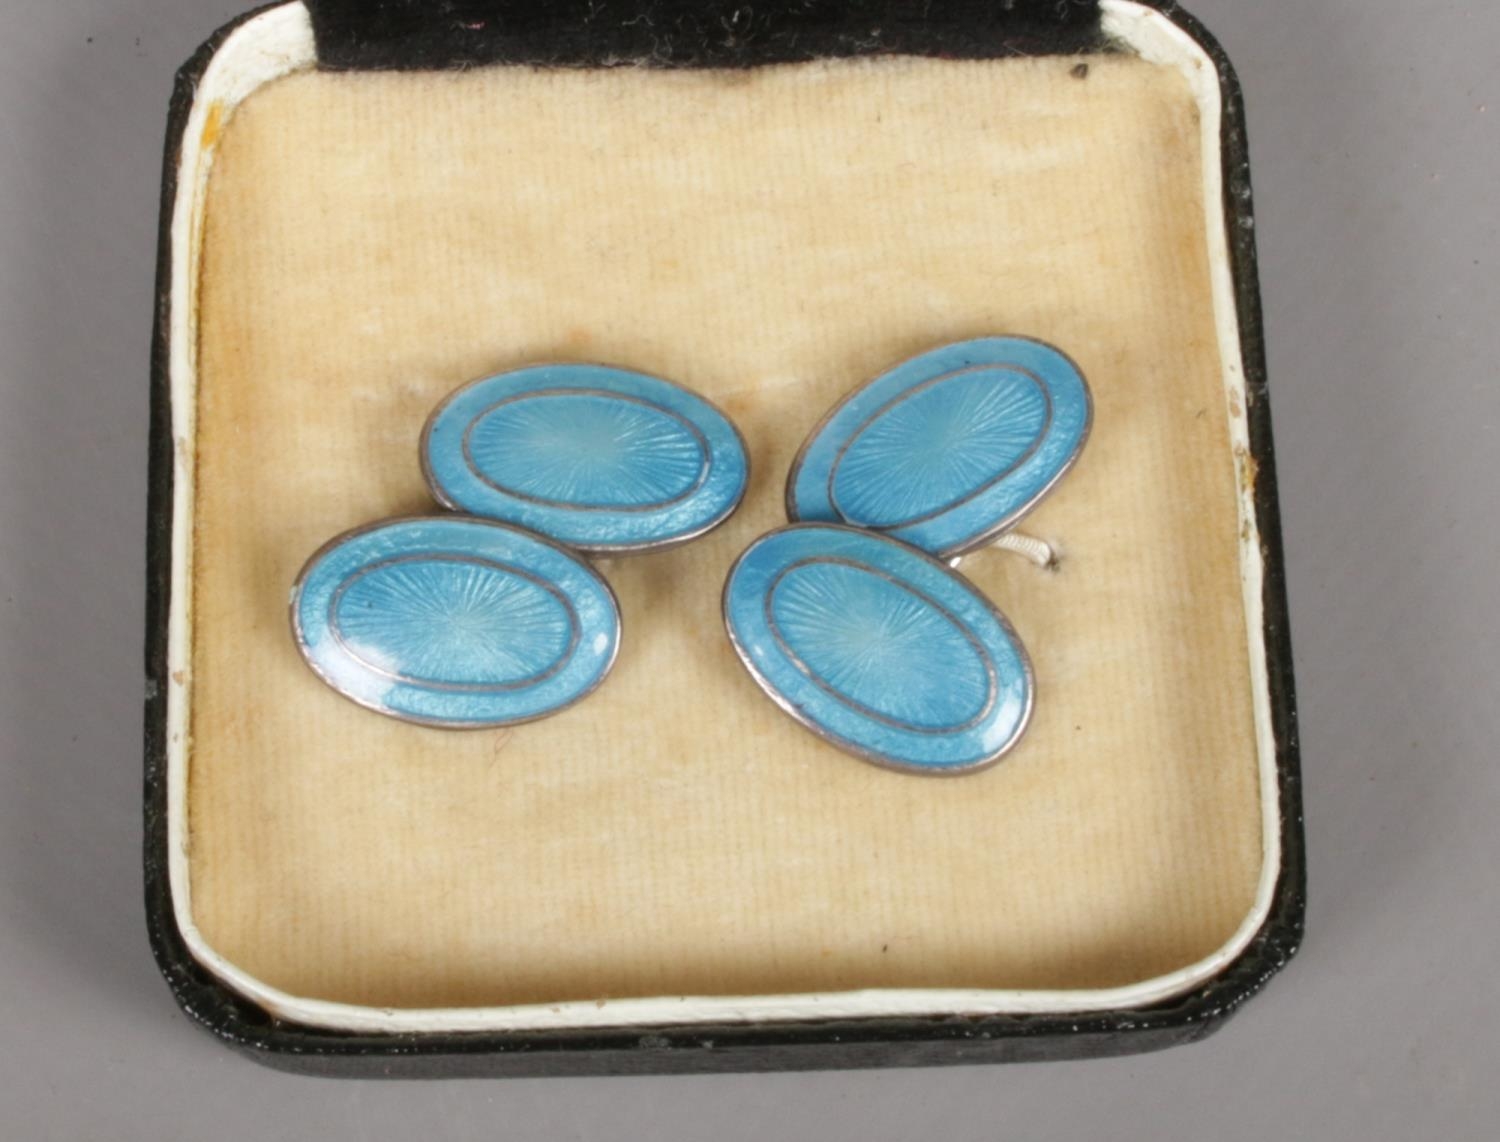 A pair of silver cufflinks with blue enamel decoration. Minor scratches to enamel.